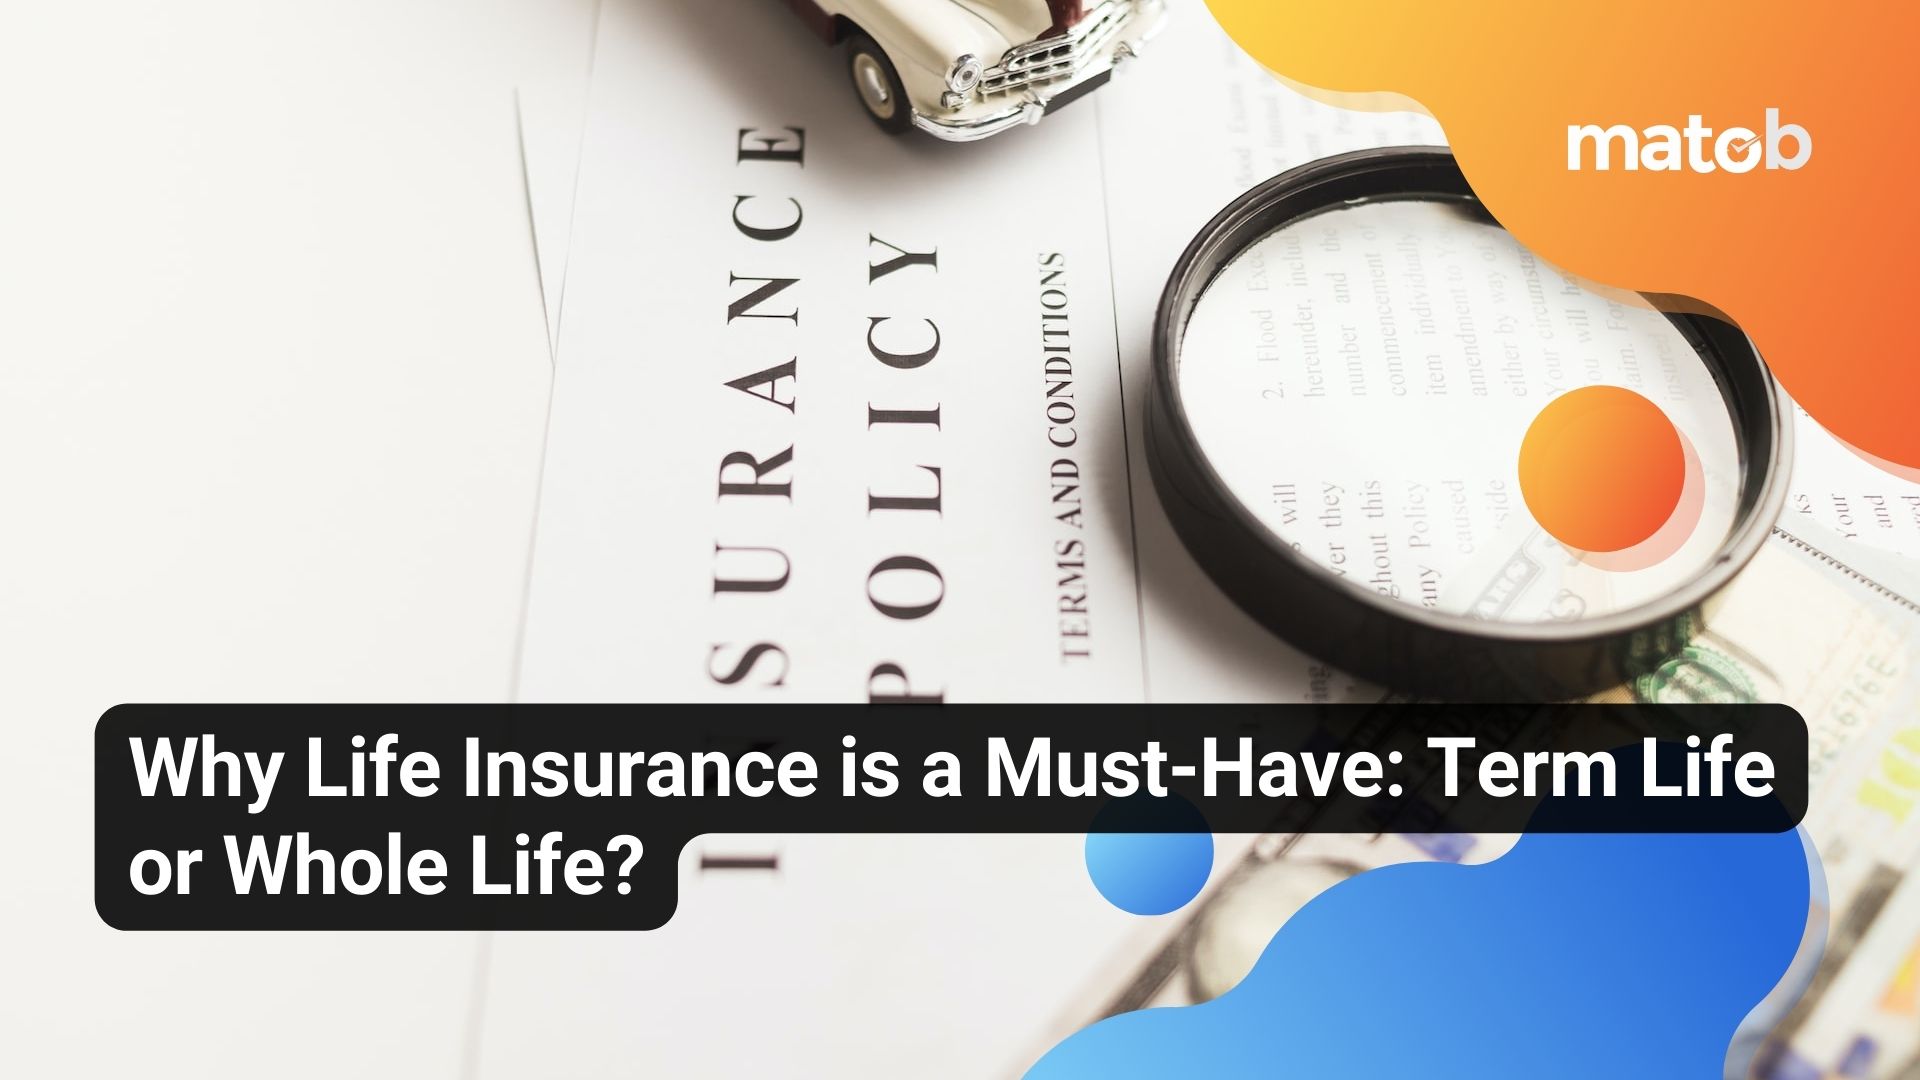 Why Life Insurance is a Must-Have: Term Life or Whole Life?